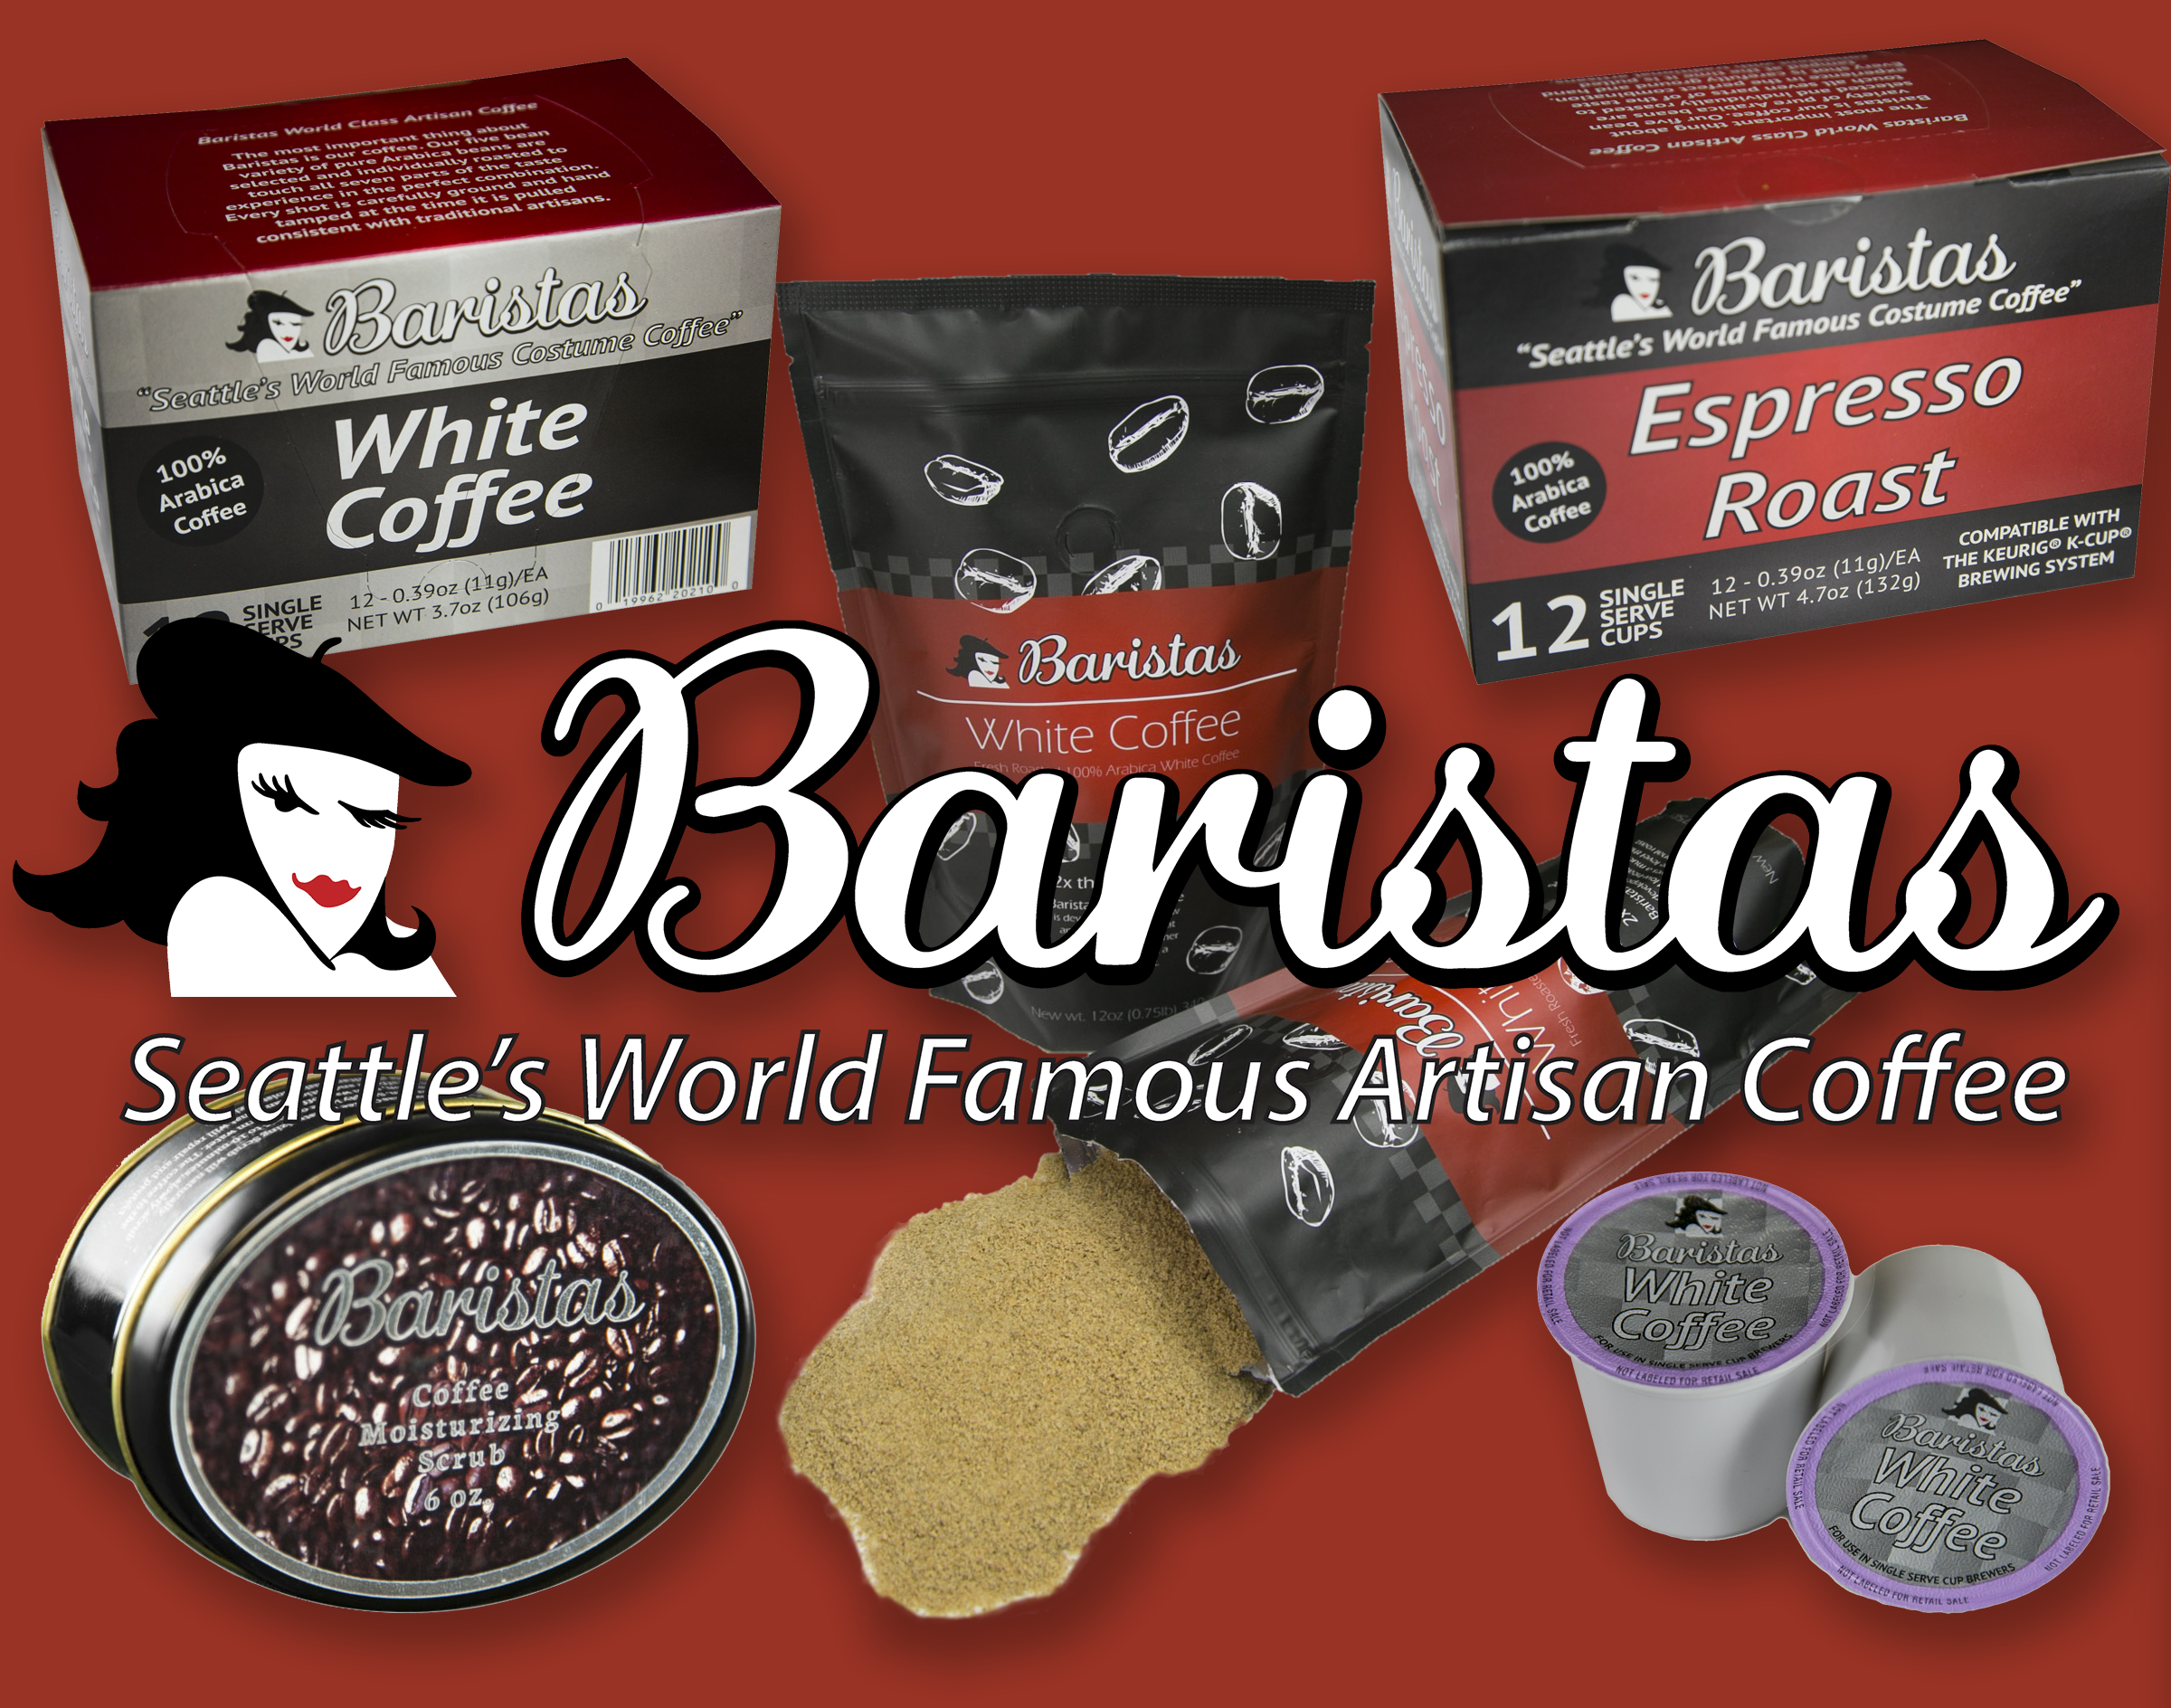 Baristas Coffee Company Inc., Friday, September 20, 2019, Press release picture